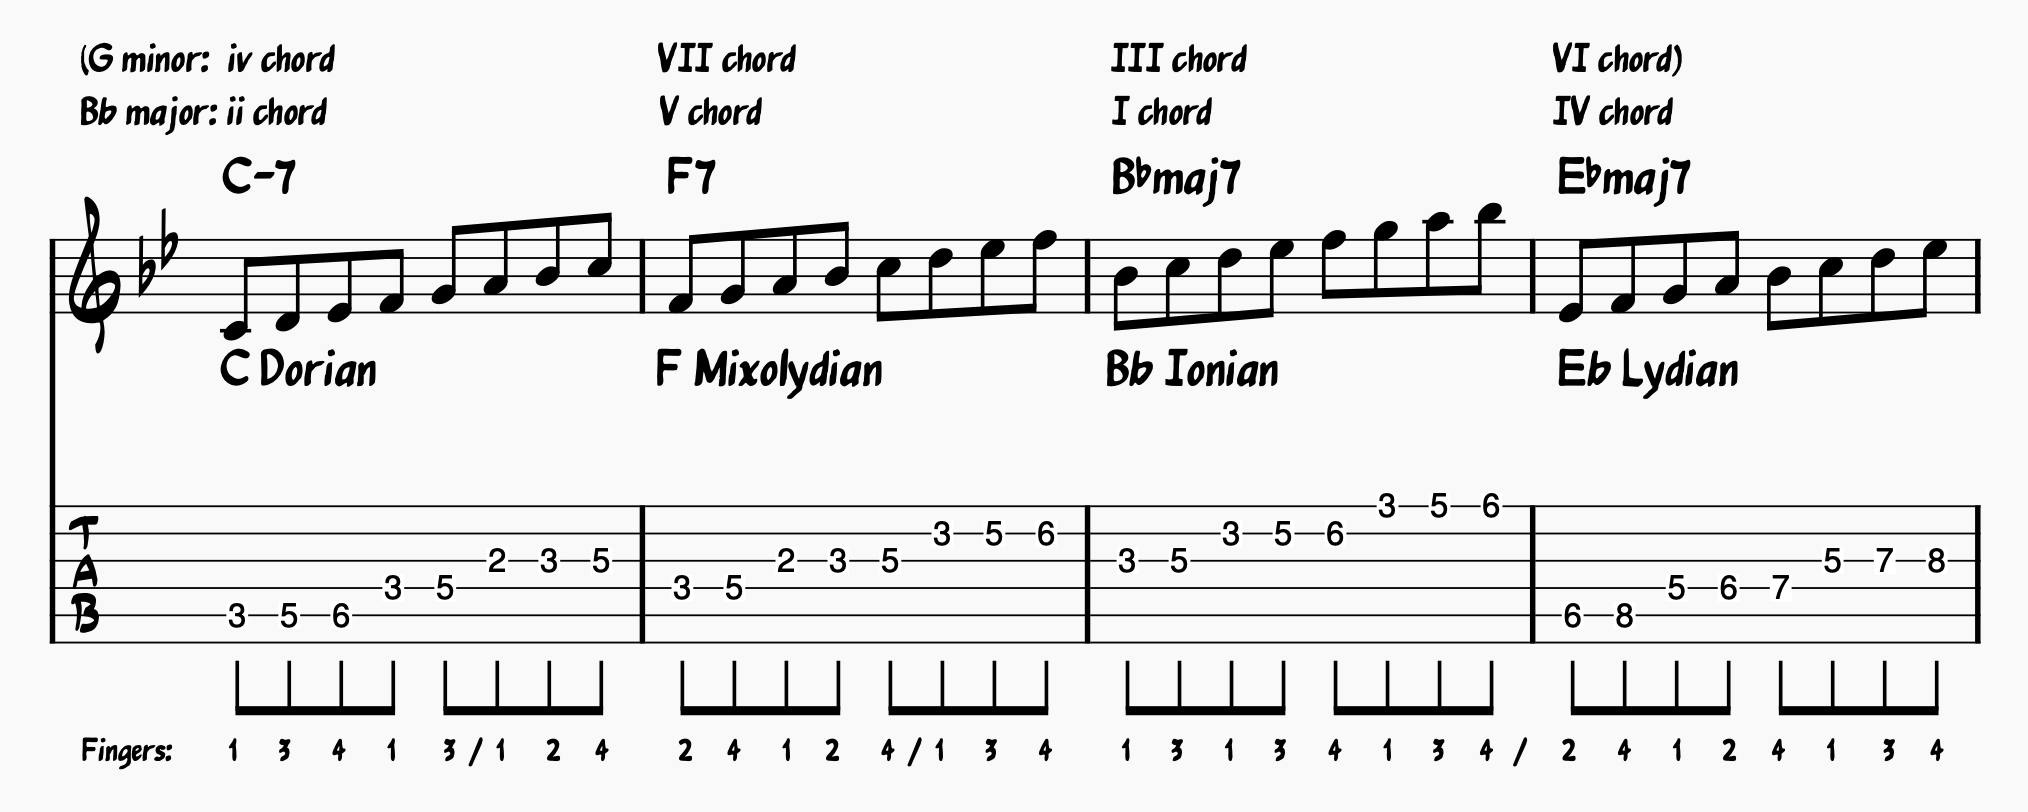 Autumn Leaves Chords With Modes for Each Chord (ii-V-I-IV progression)